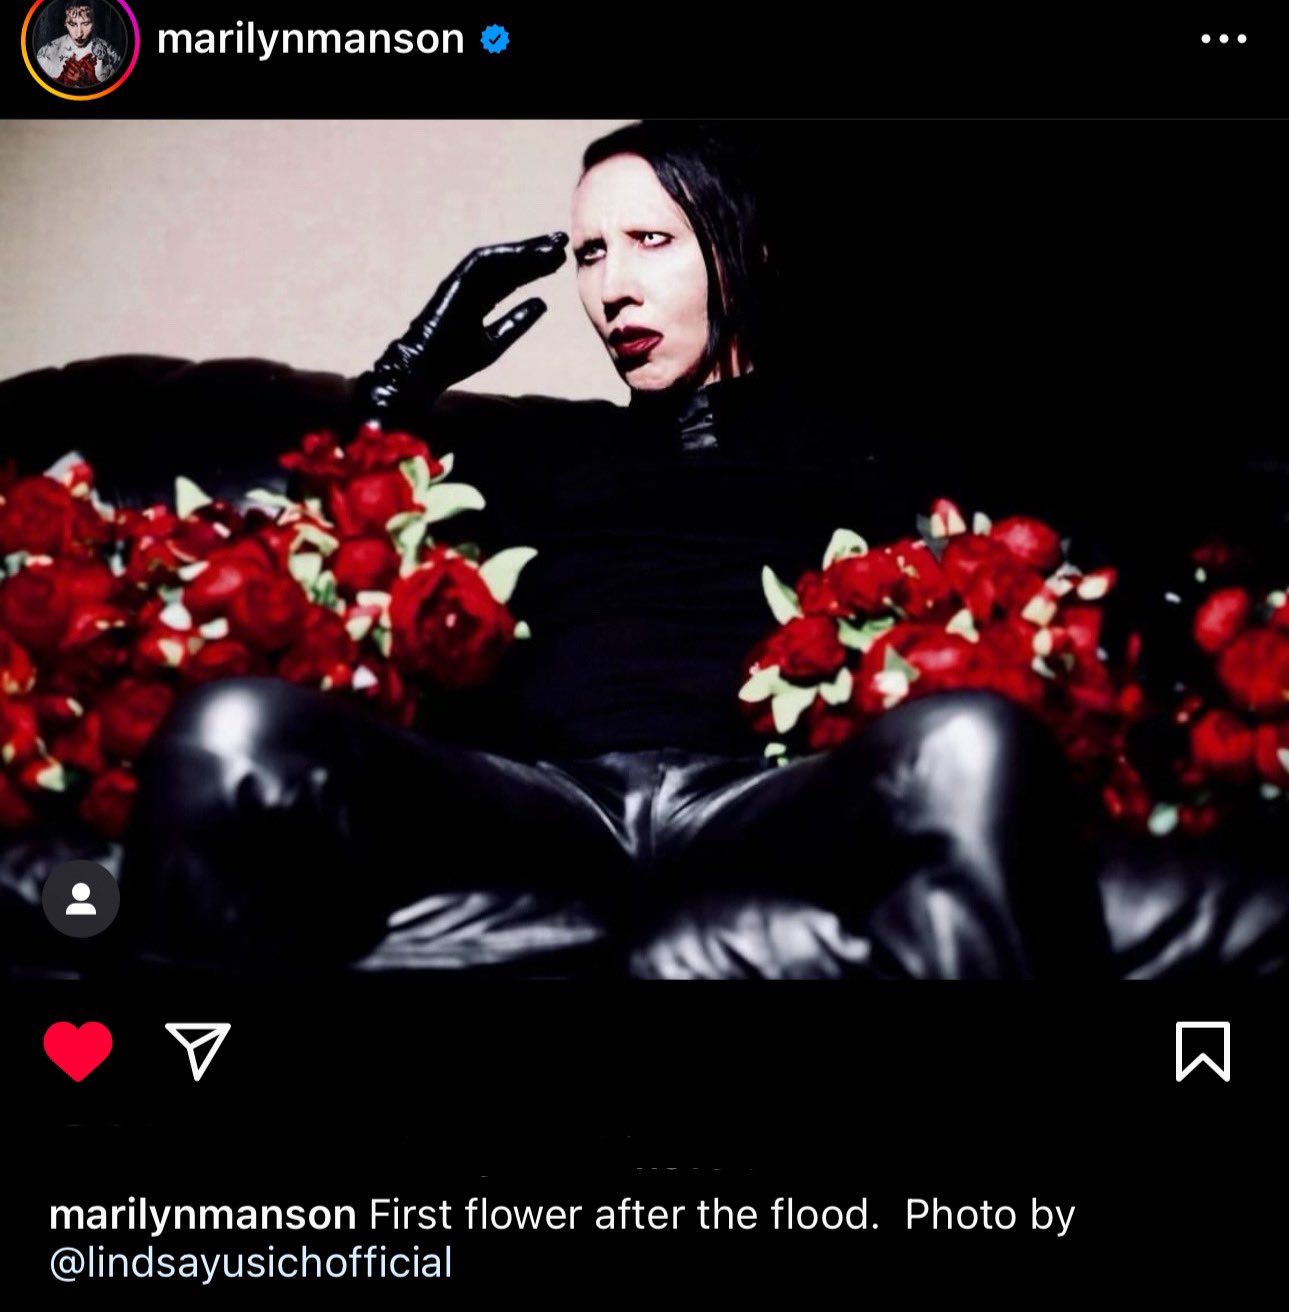 Marilyn Manson Valentine's Day Message and Portrait by Lindsay Usich